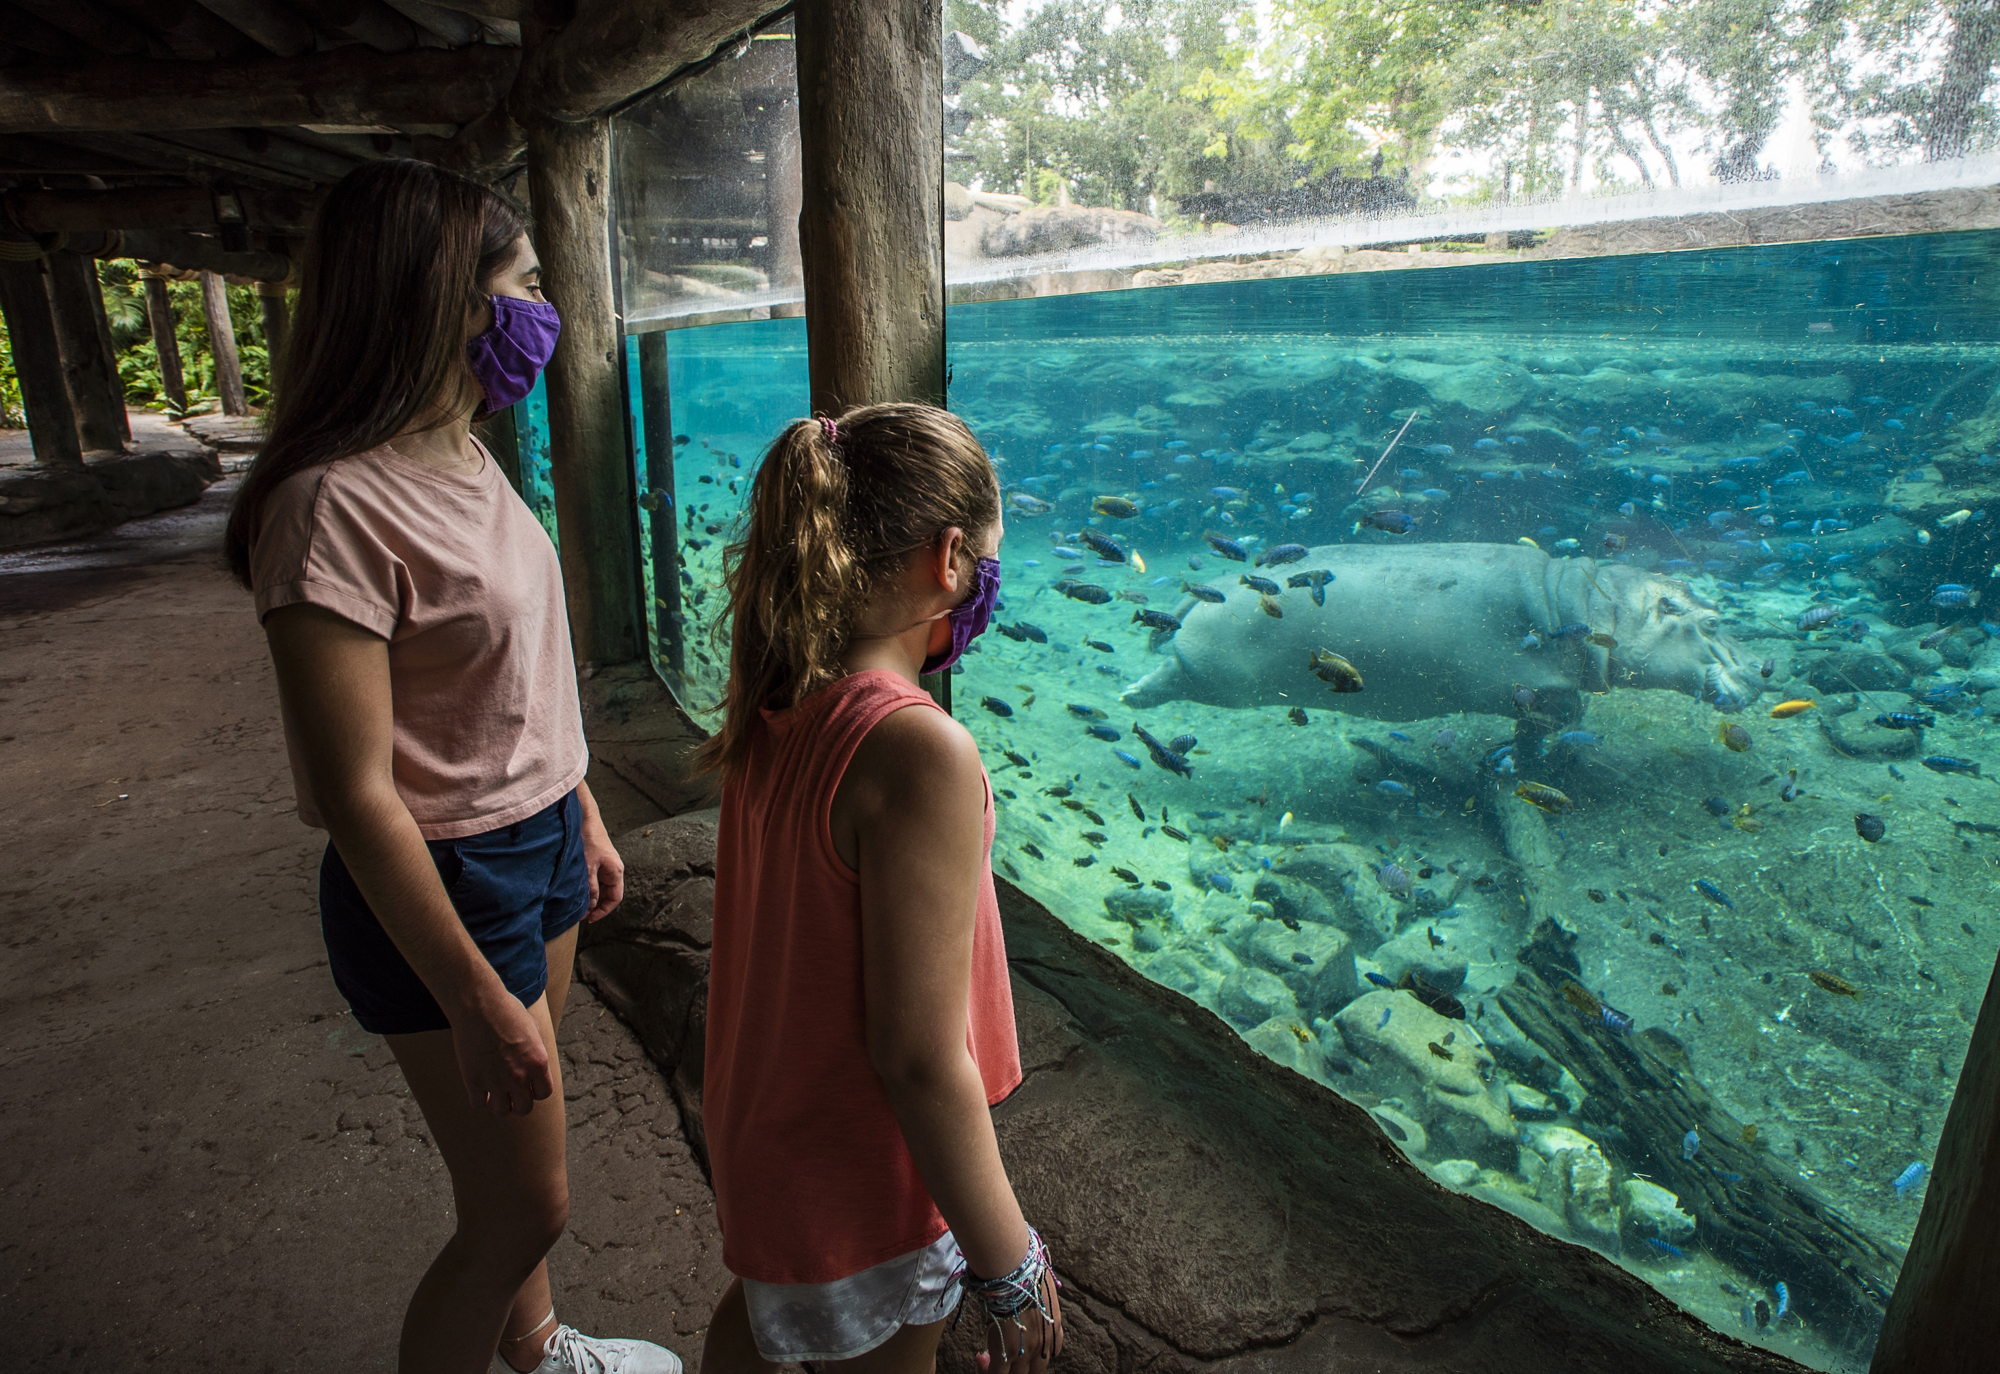 Courtesy. Guests are required to wear masks and follow social-distancing guidelines at Busch Gardens Tampa Bay's animal habitats.